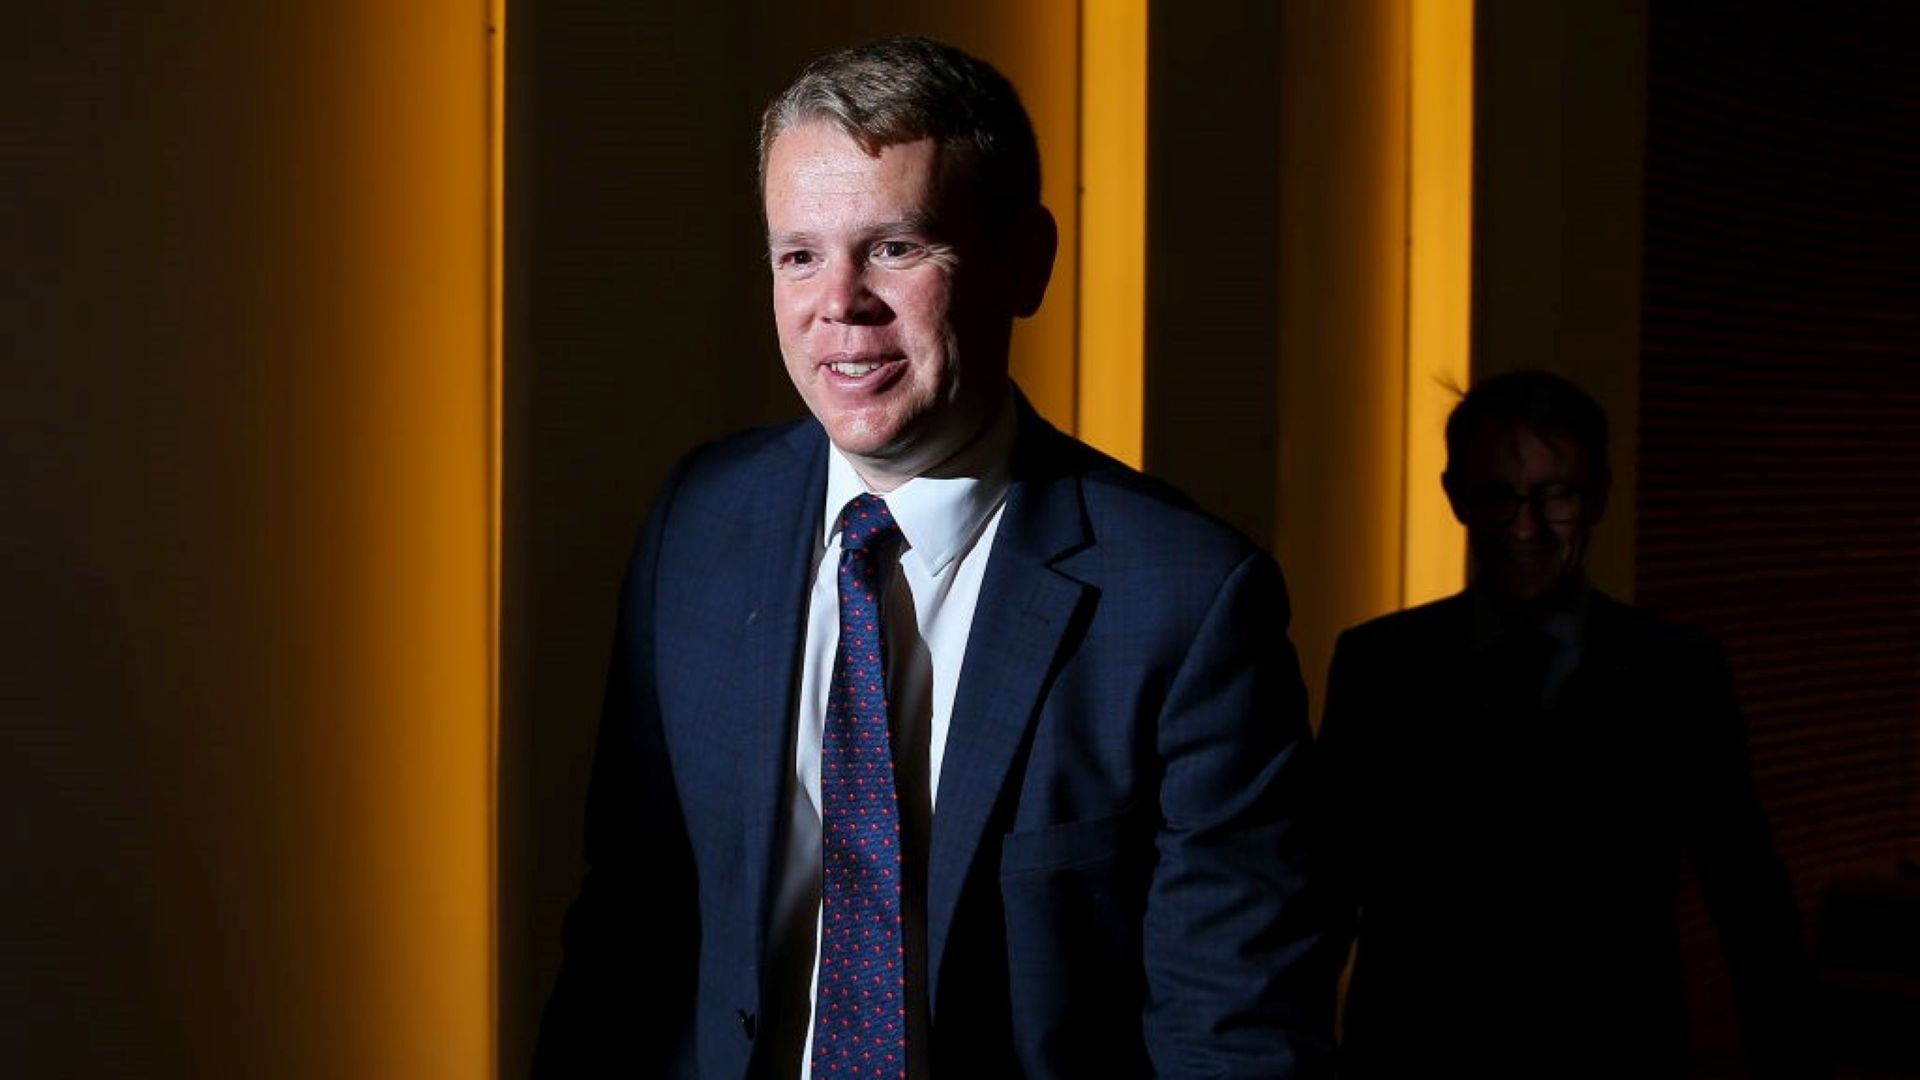 Chris Hipkins family: Know about New Zealand’s newest PM’s parents, wife Jade Marie and children